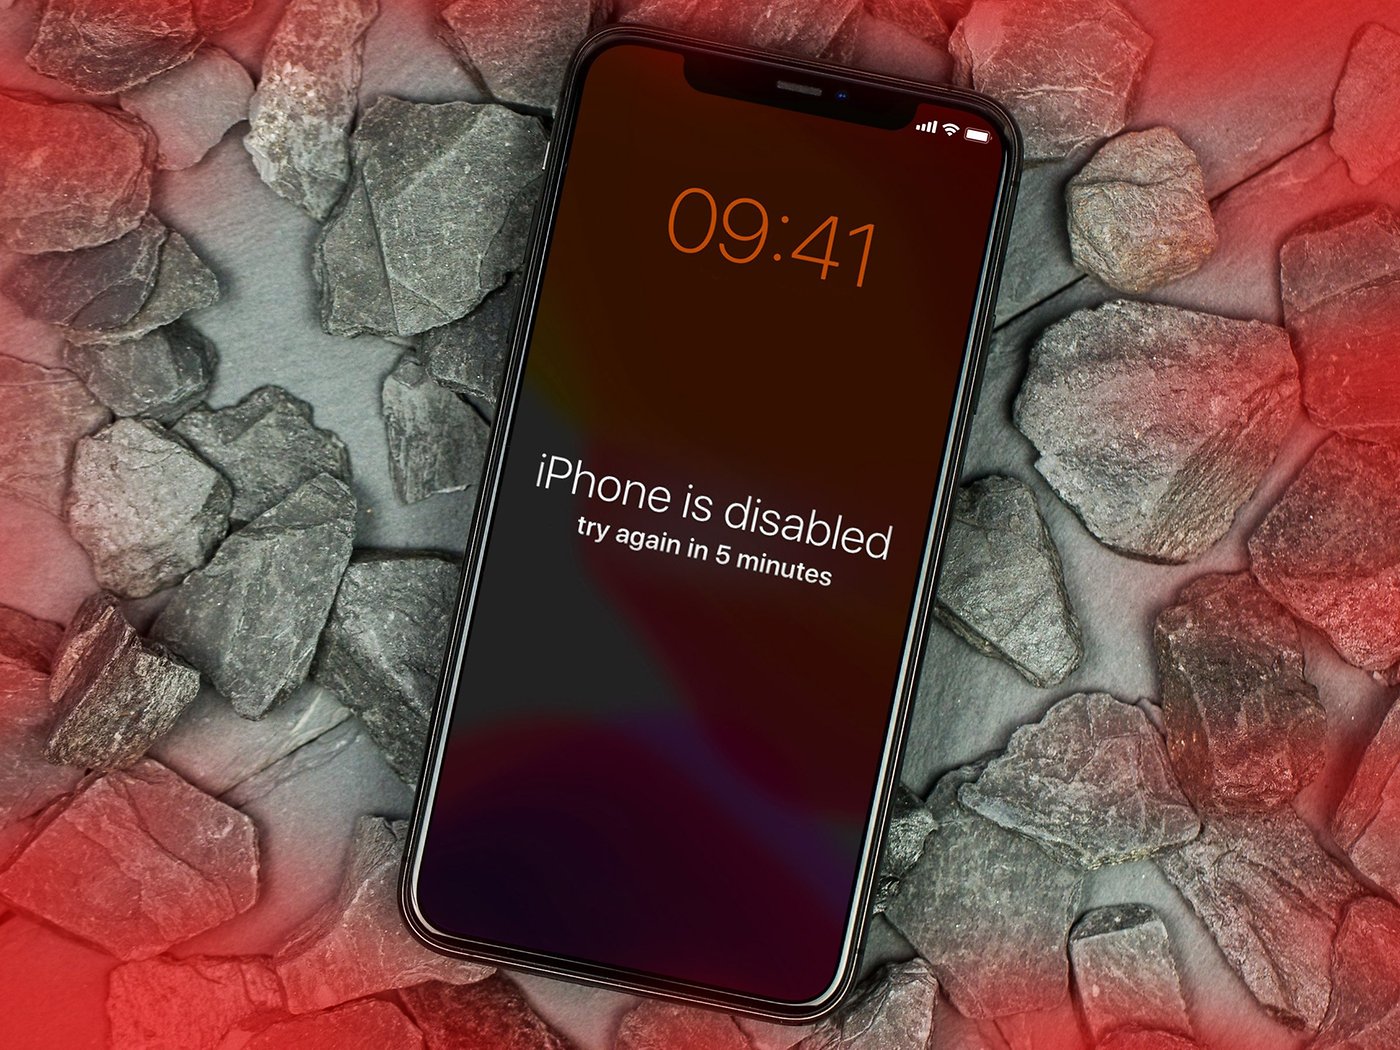 Iphone Disabled wallpaper by TemptatioN  Download on ZEDGE  cd91